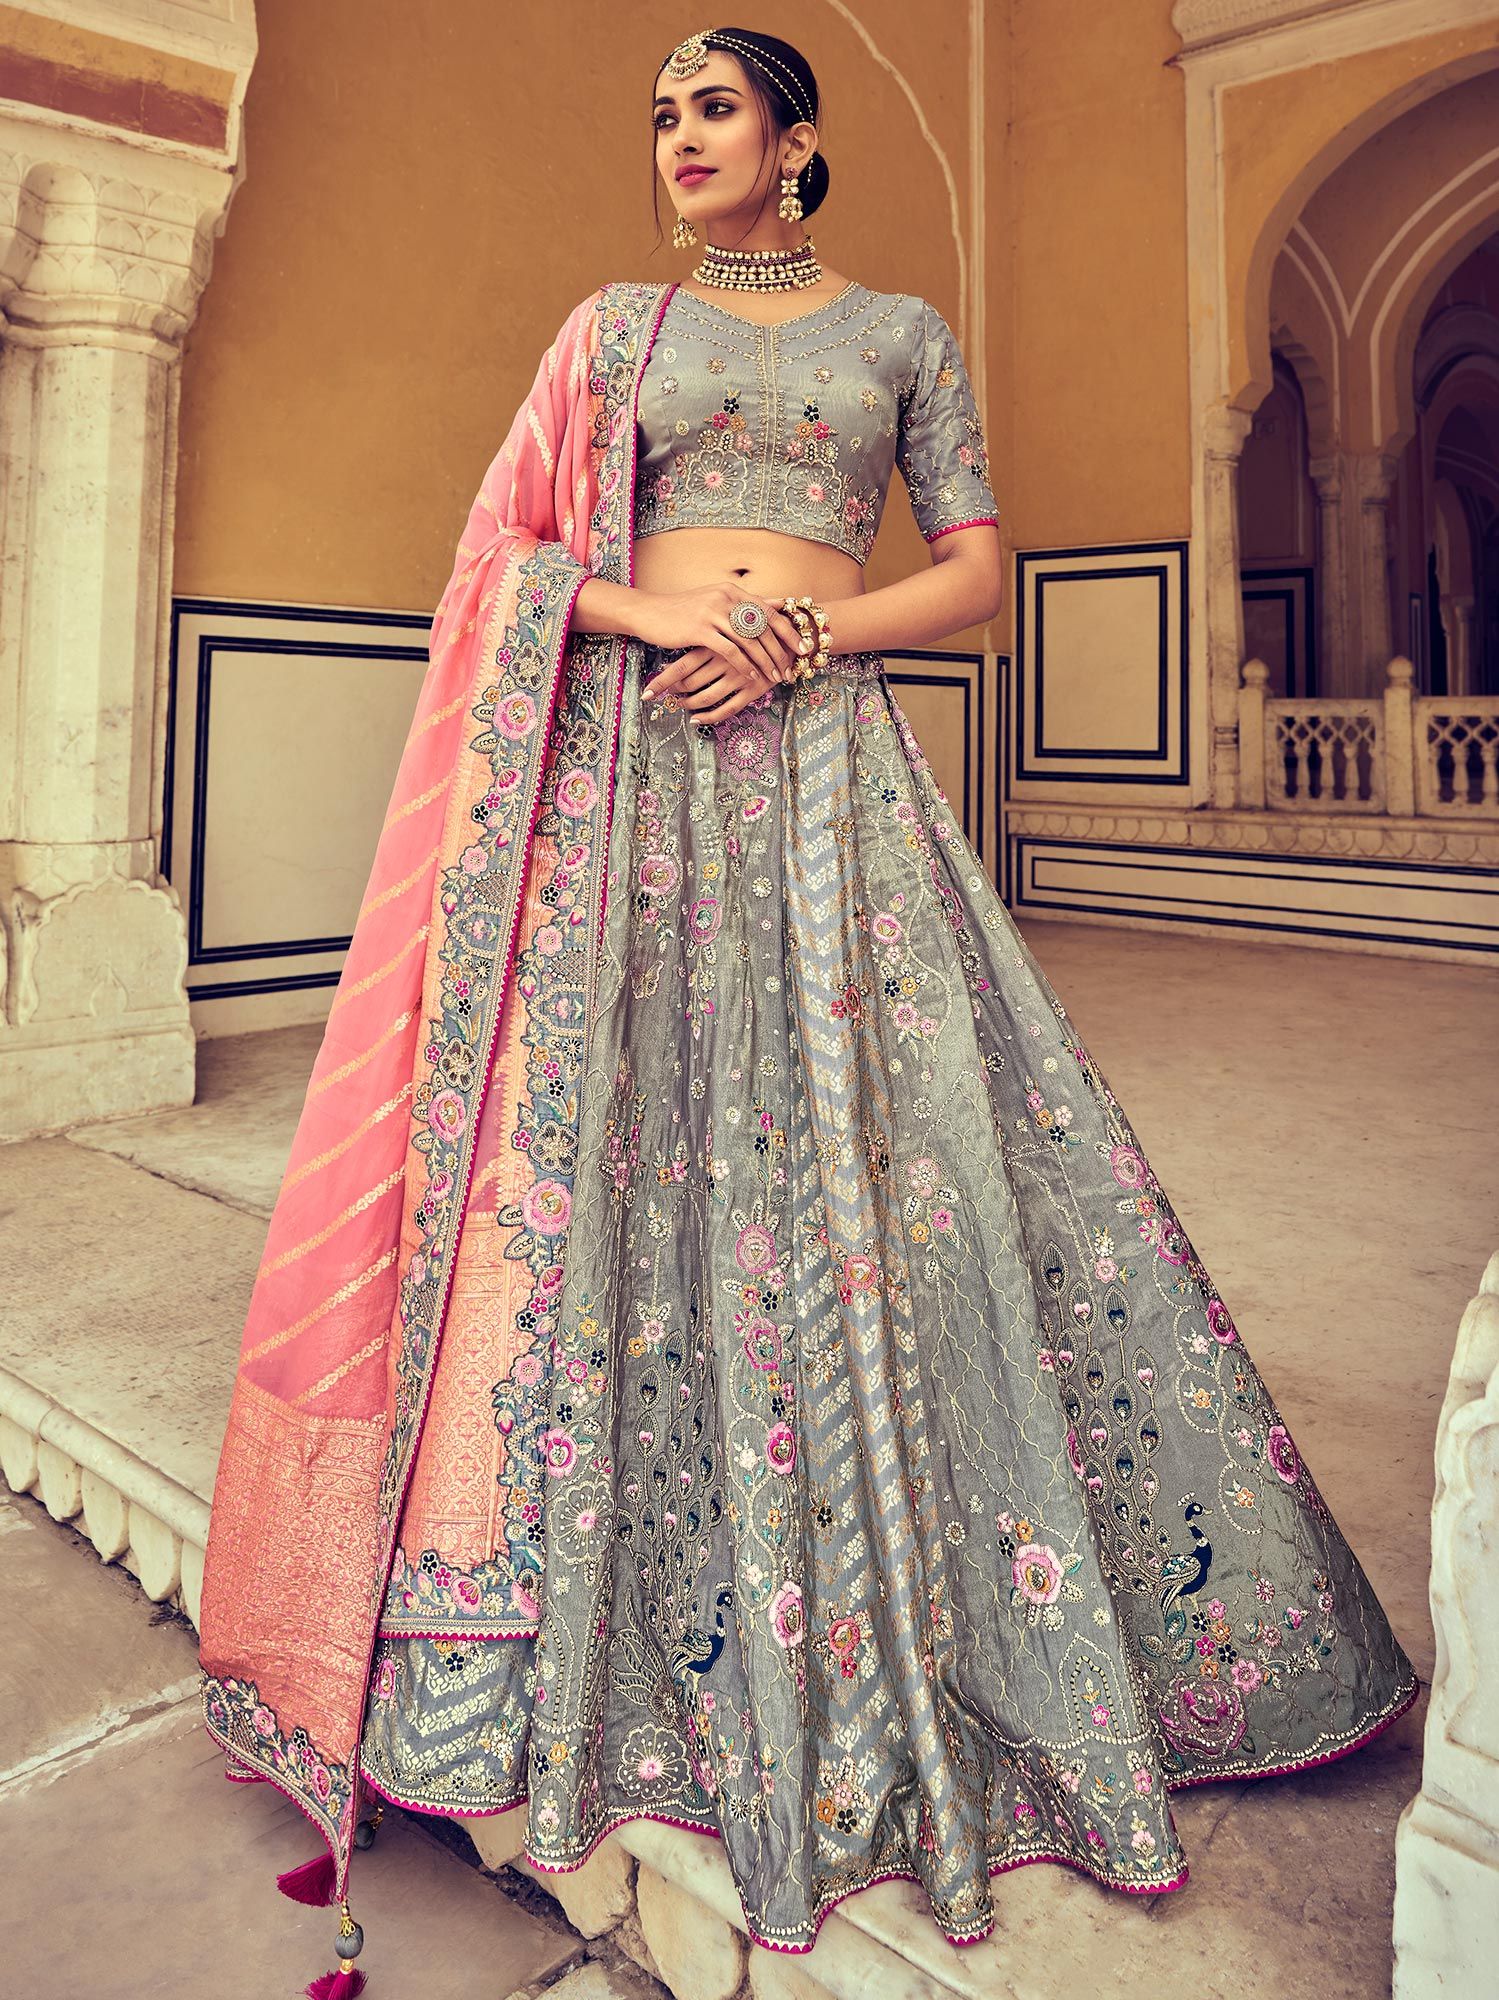 Grey - Wedding - Collection of Indian Dresses, Accessories & Clothing in  Ethnic Fashion